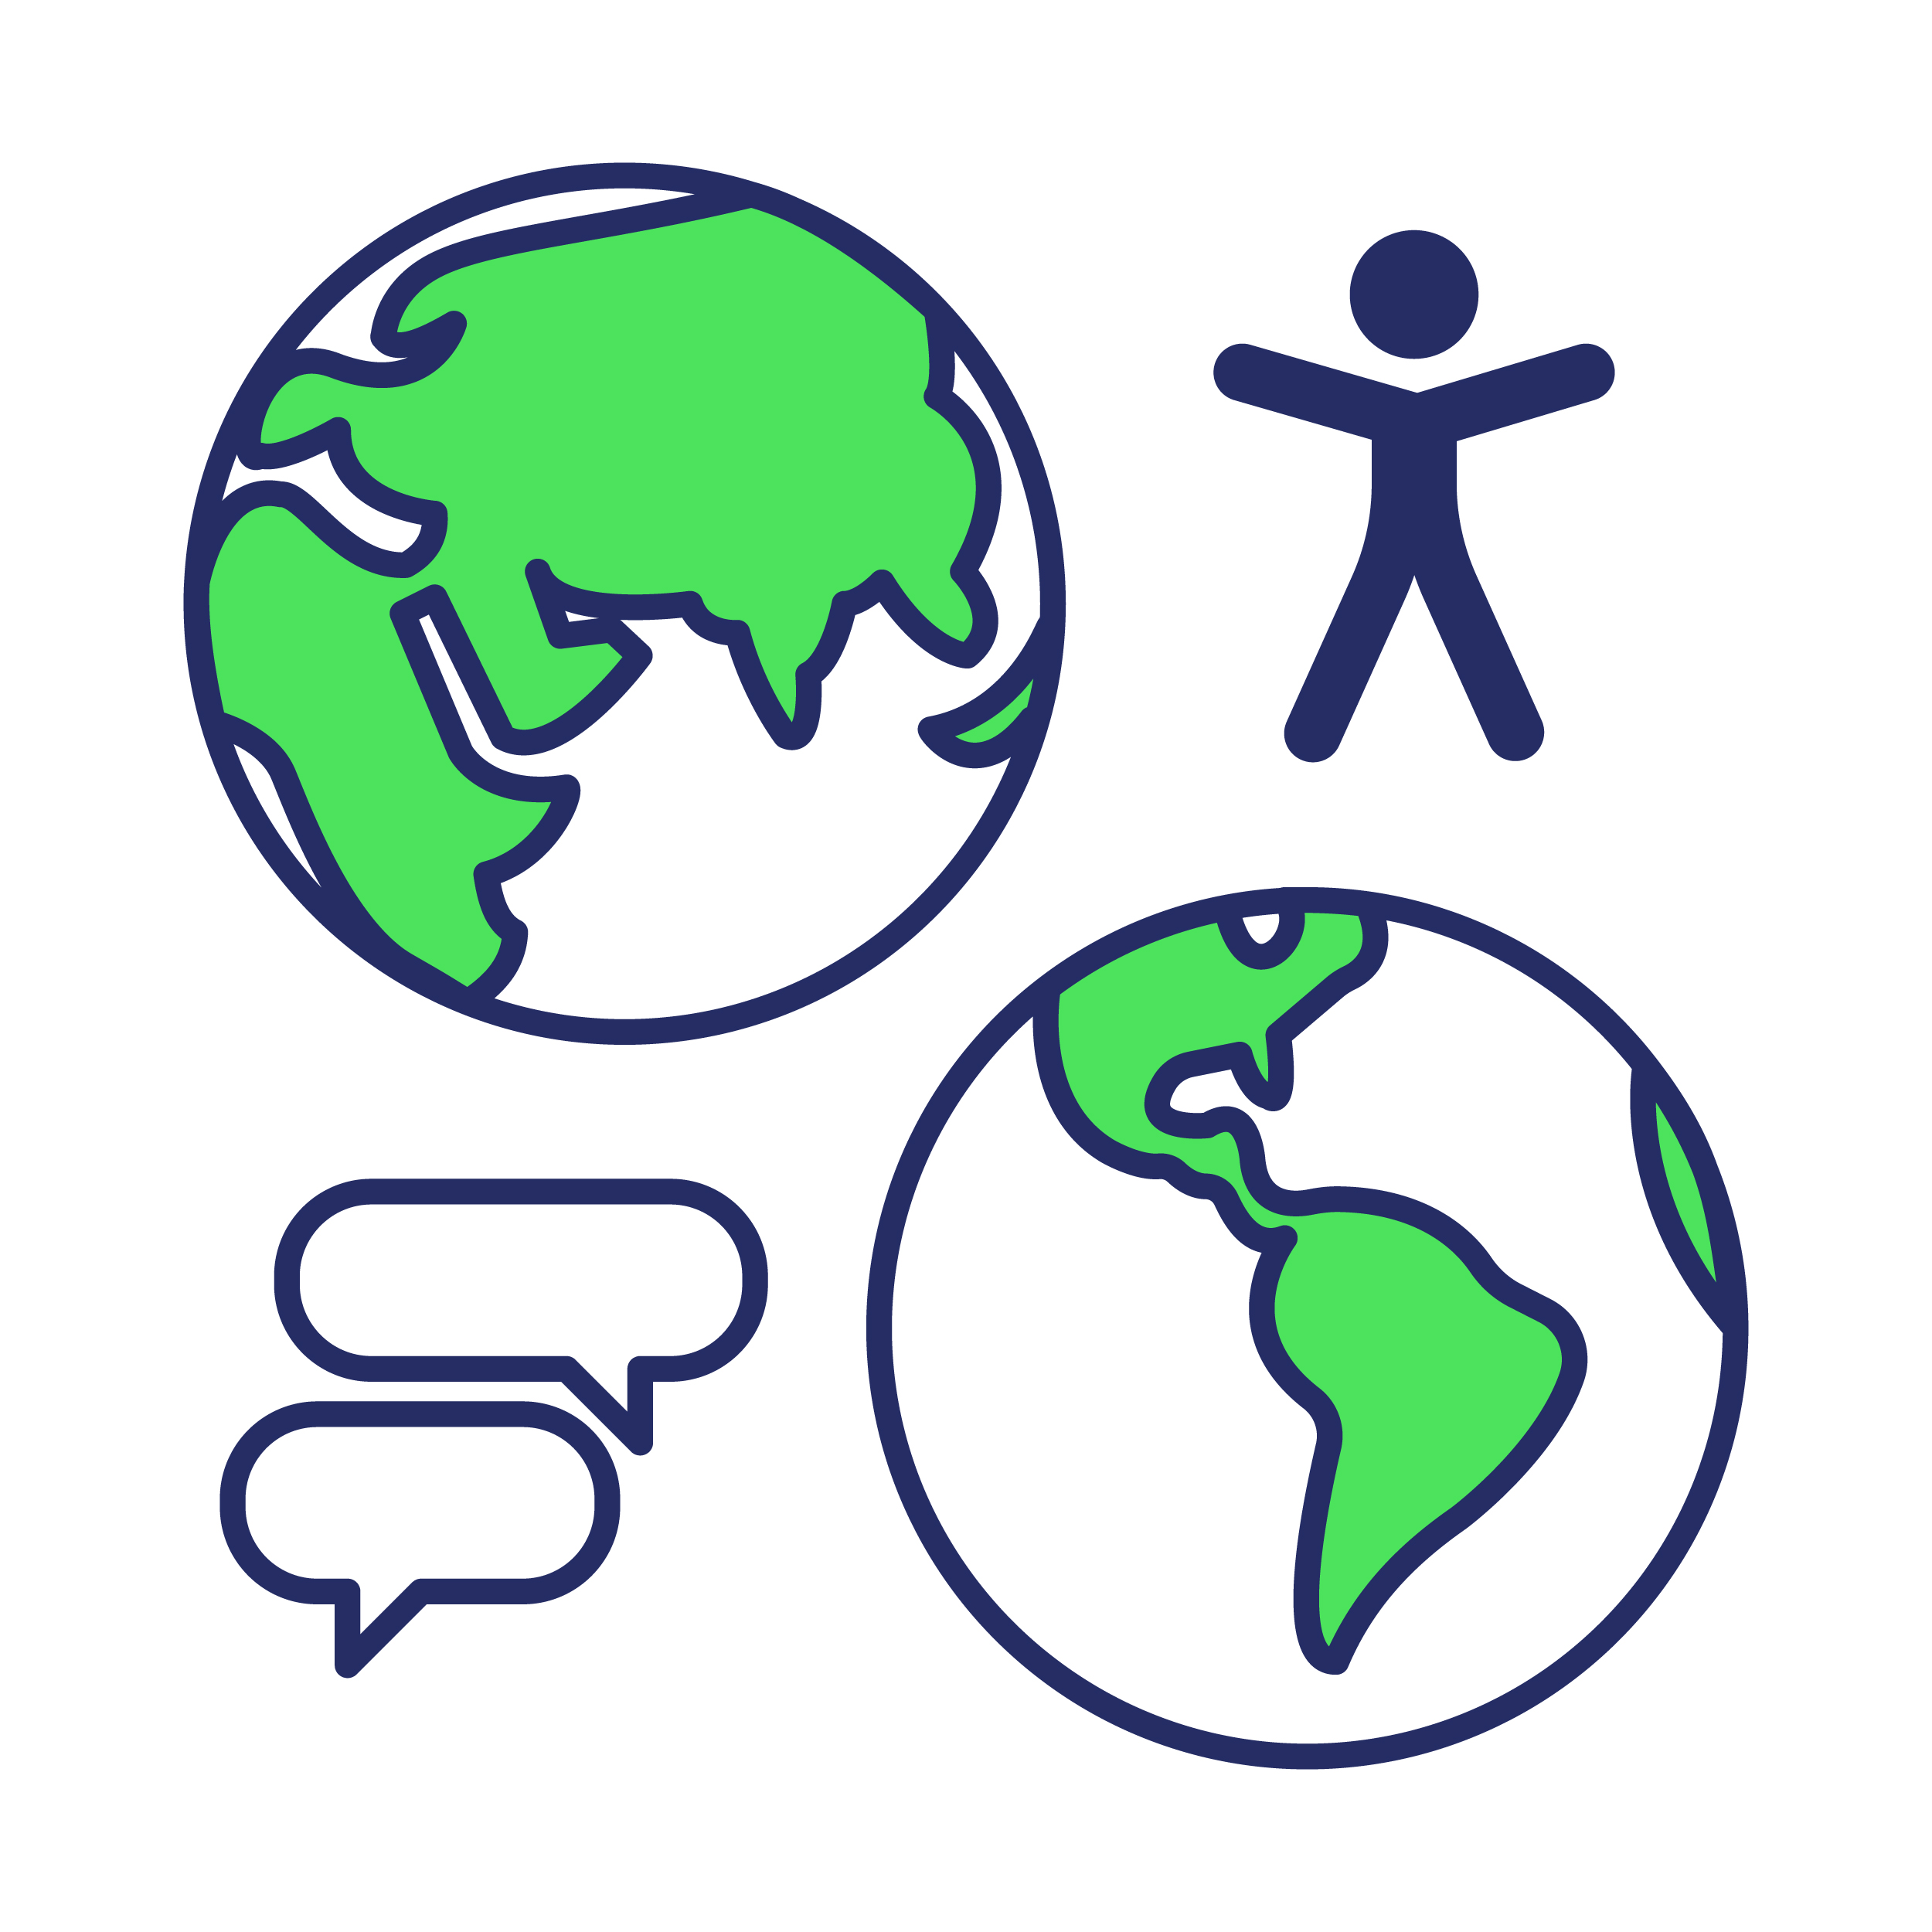 Two globe icons with speech bubbles and accessibility symbol.